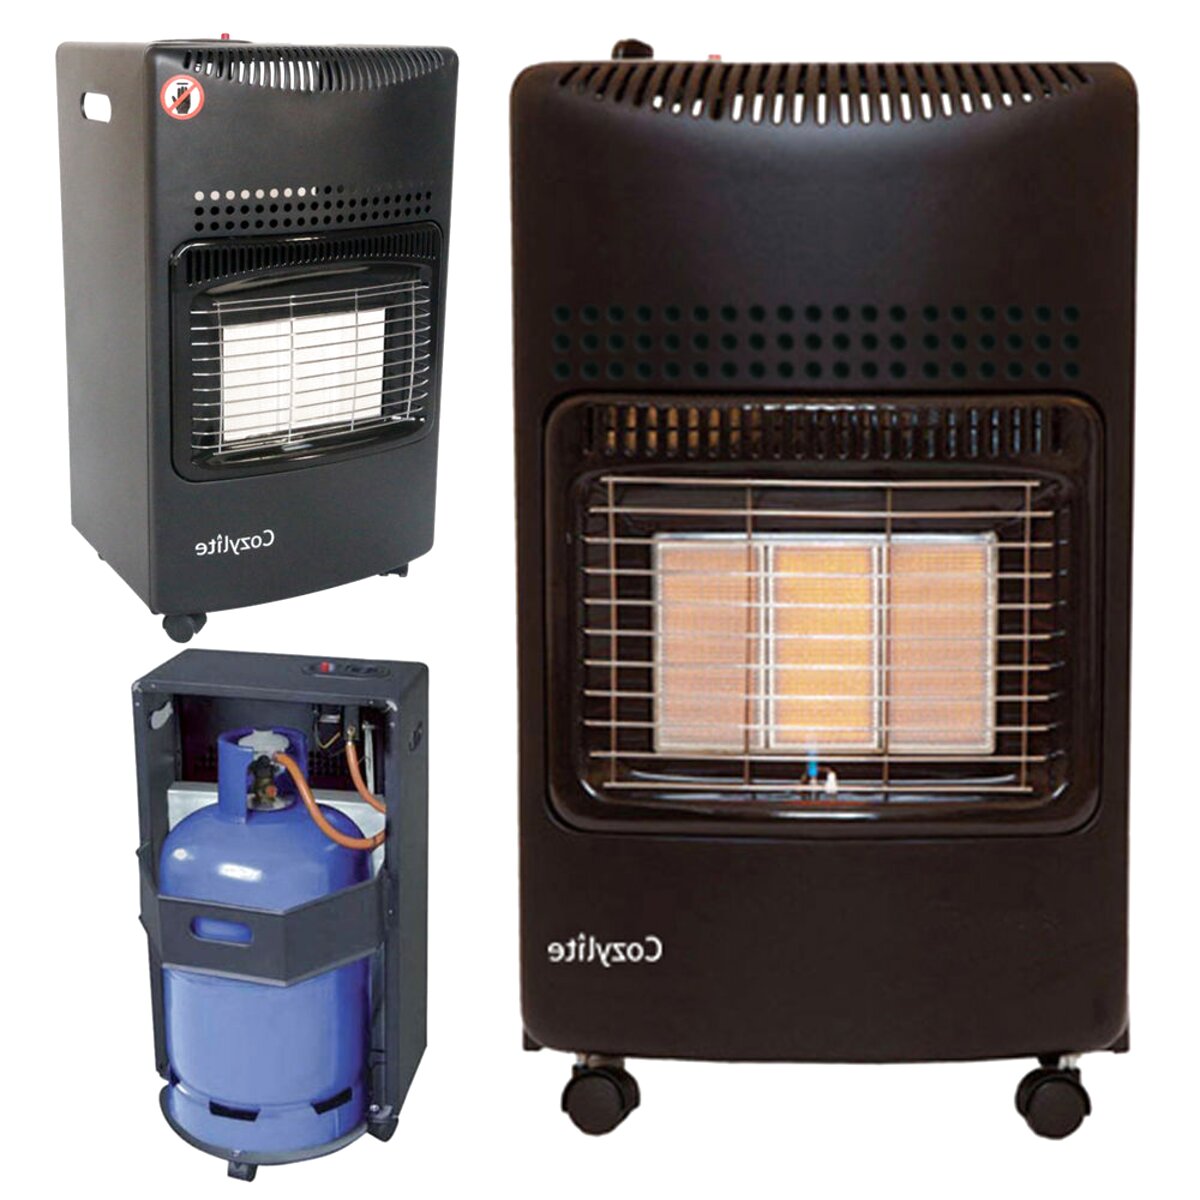 second-hand-portable-gas-heater-in-ireland-54-used-portable-gas-heaters